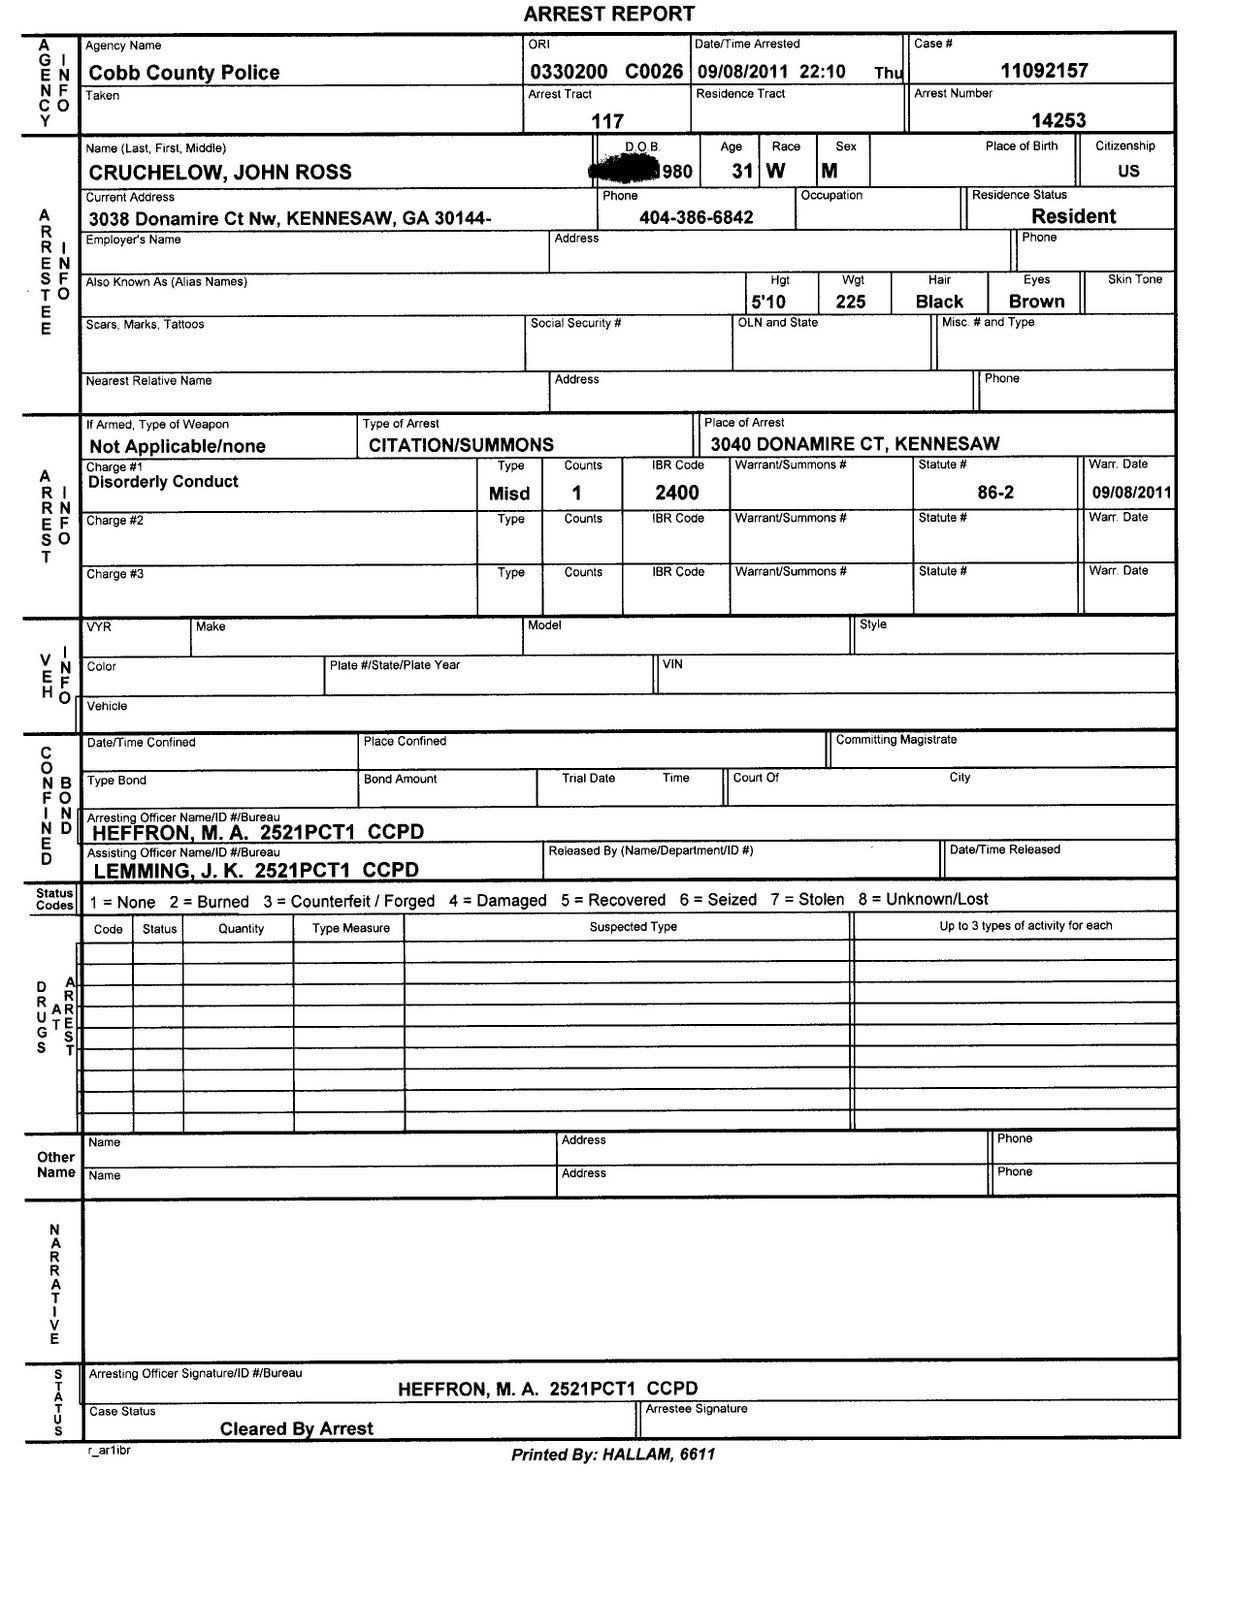 004 Blank Police Report Template Fantastic Ideas Pdf Free With Regard To Blank Police Report Template